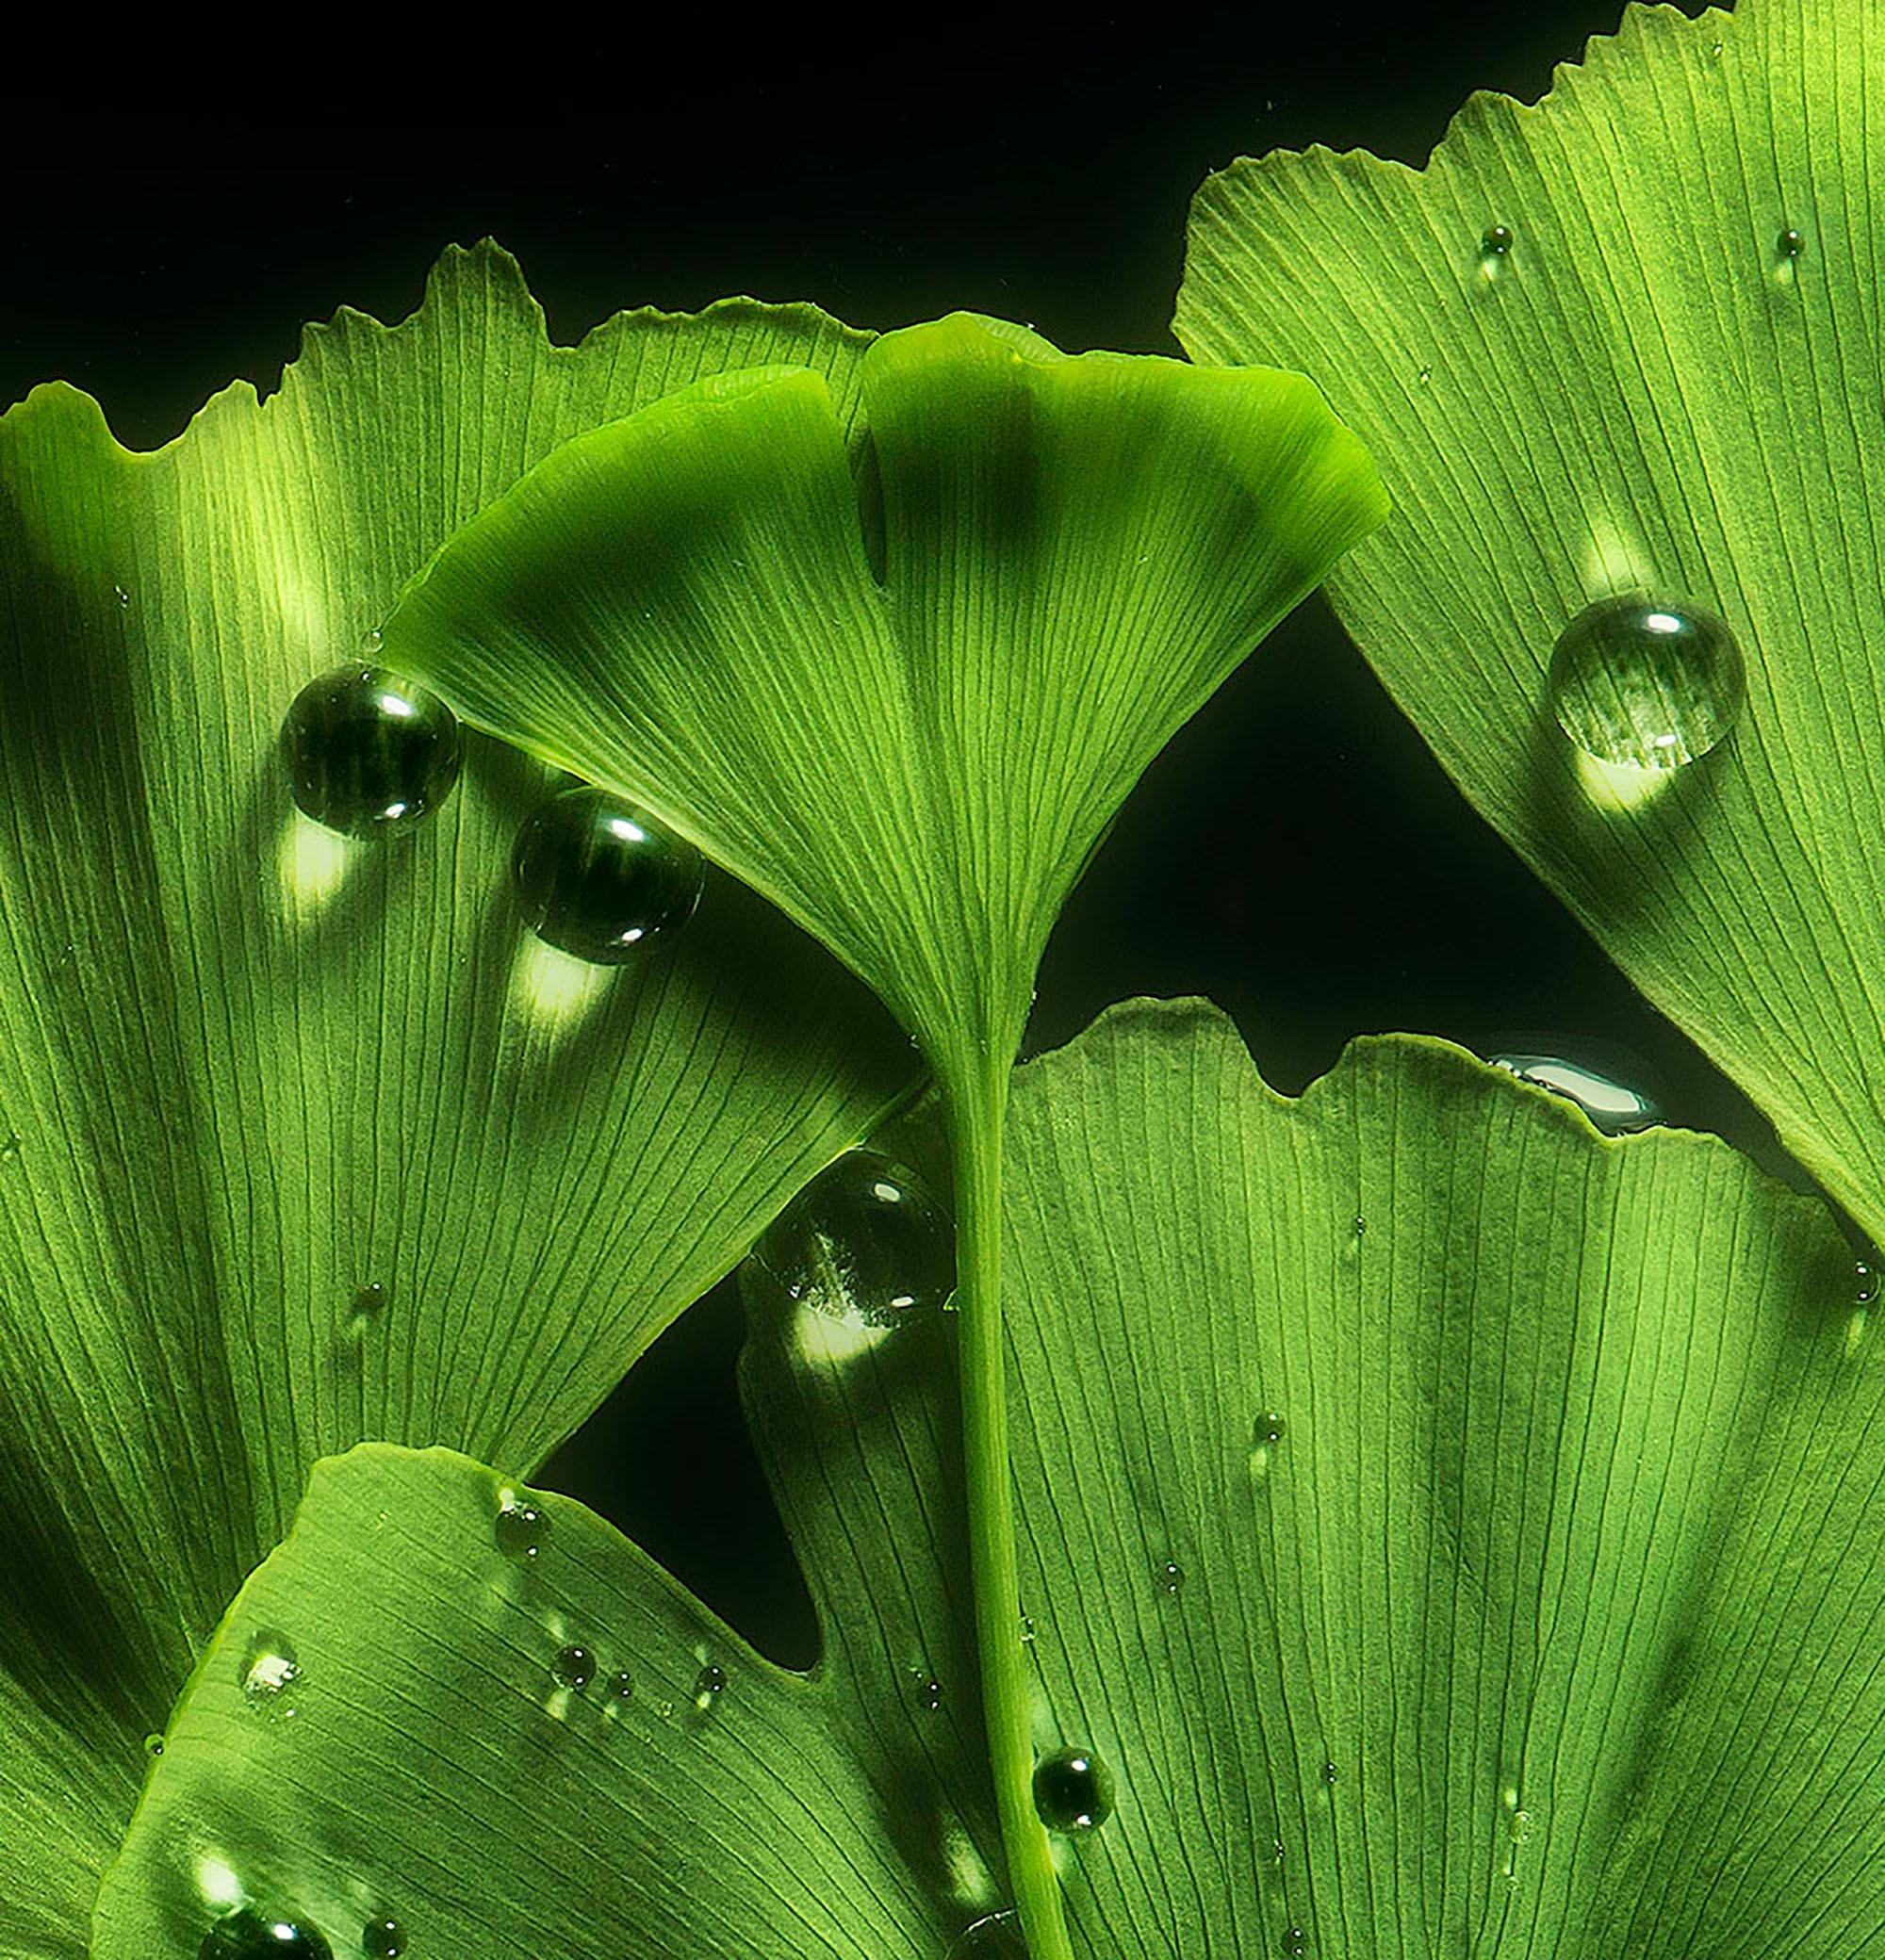 Ginko Biloba No. 1, floral photography, limited edition print, green art - Black Color Photograph by Allan Forsyth